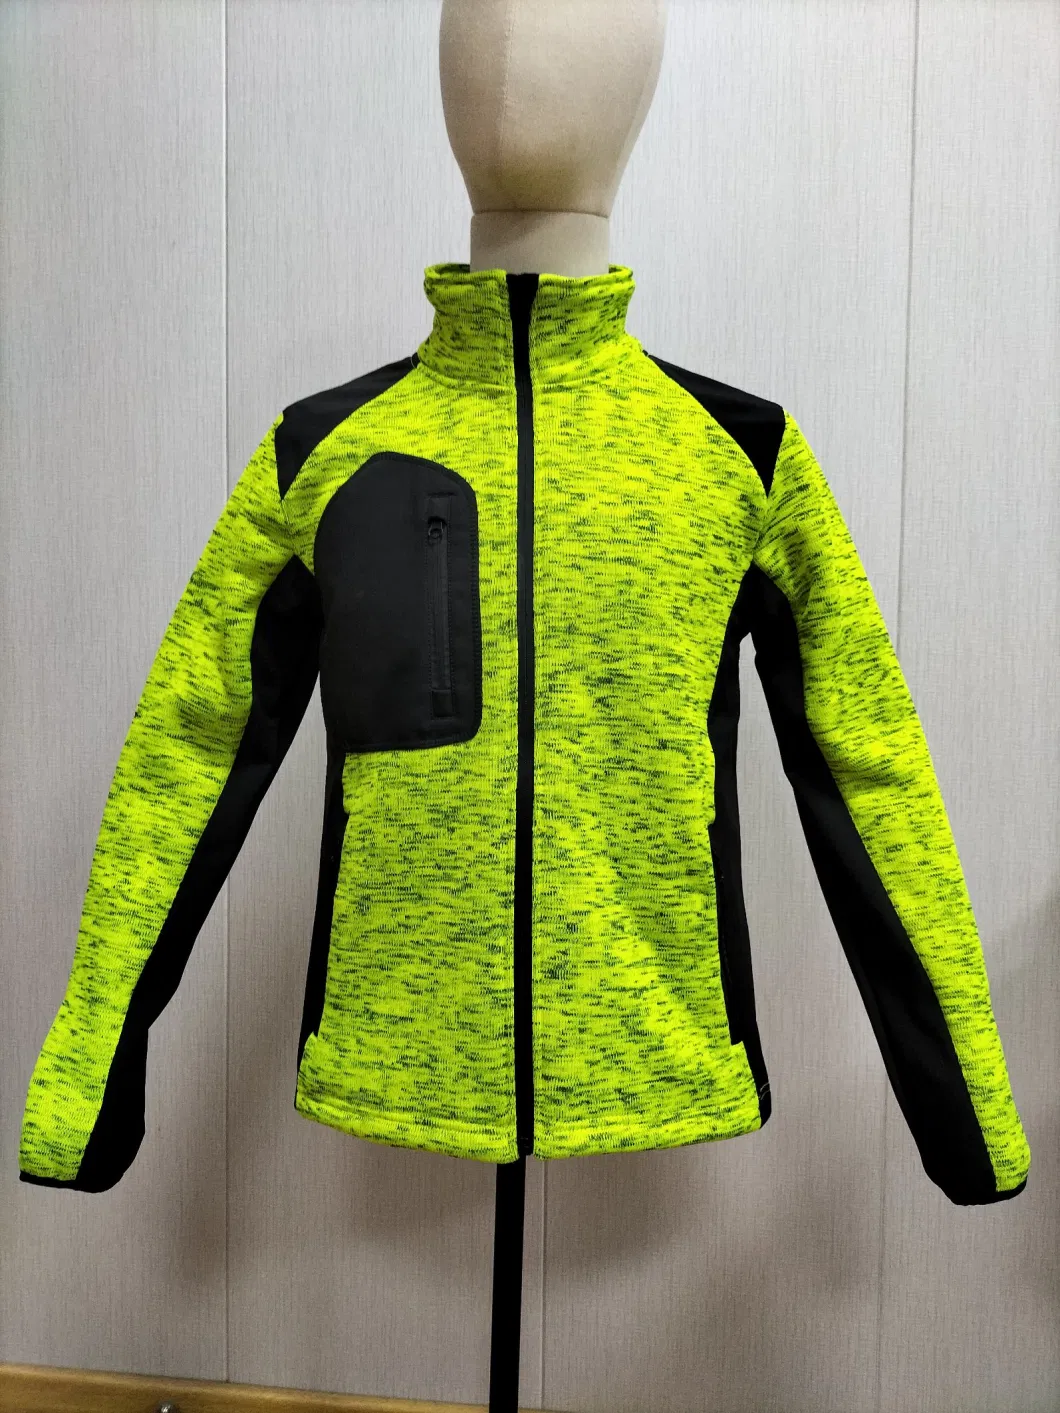 Men&prime;s Cheap Custom Embroidery Logo Sub Light Weight Softshell Thermal Knit Shell Fleece Jackets